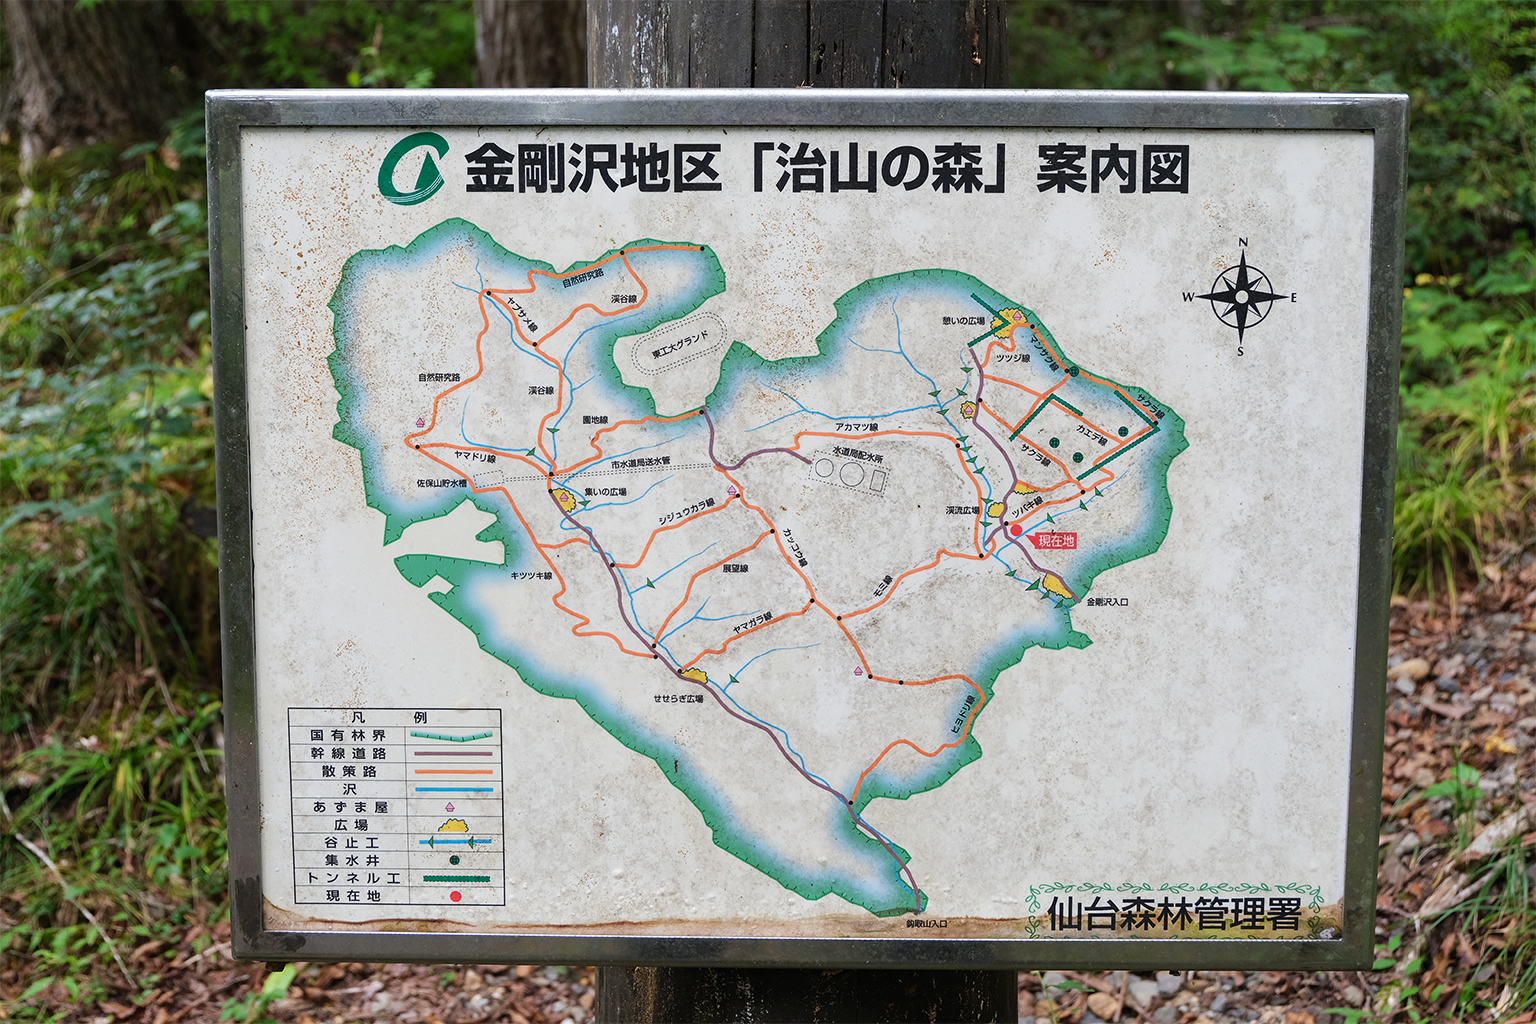 Map of a chisan forest.